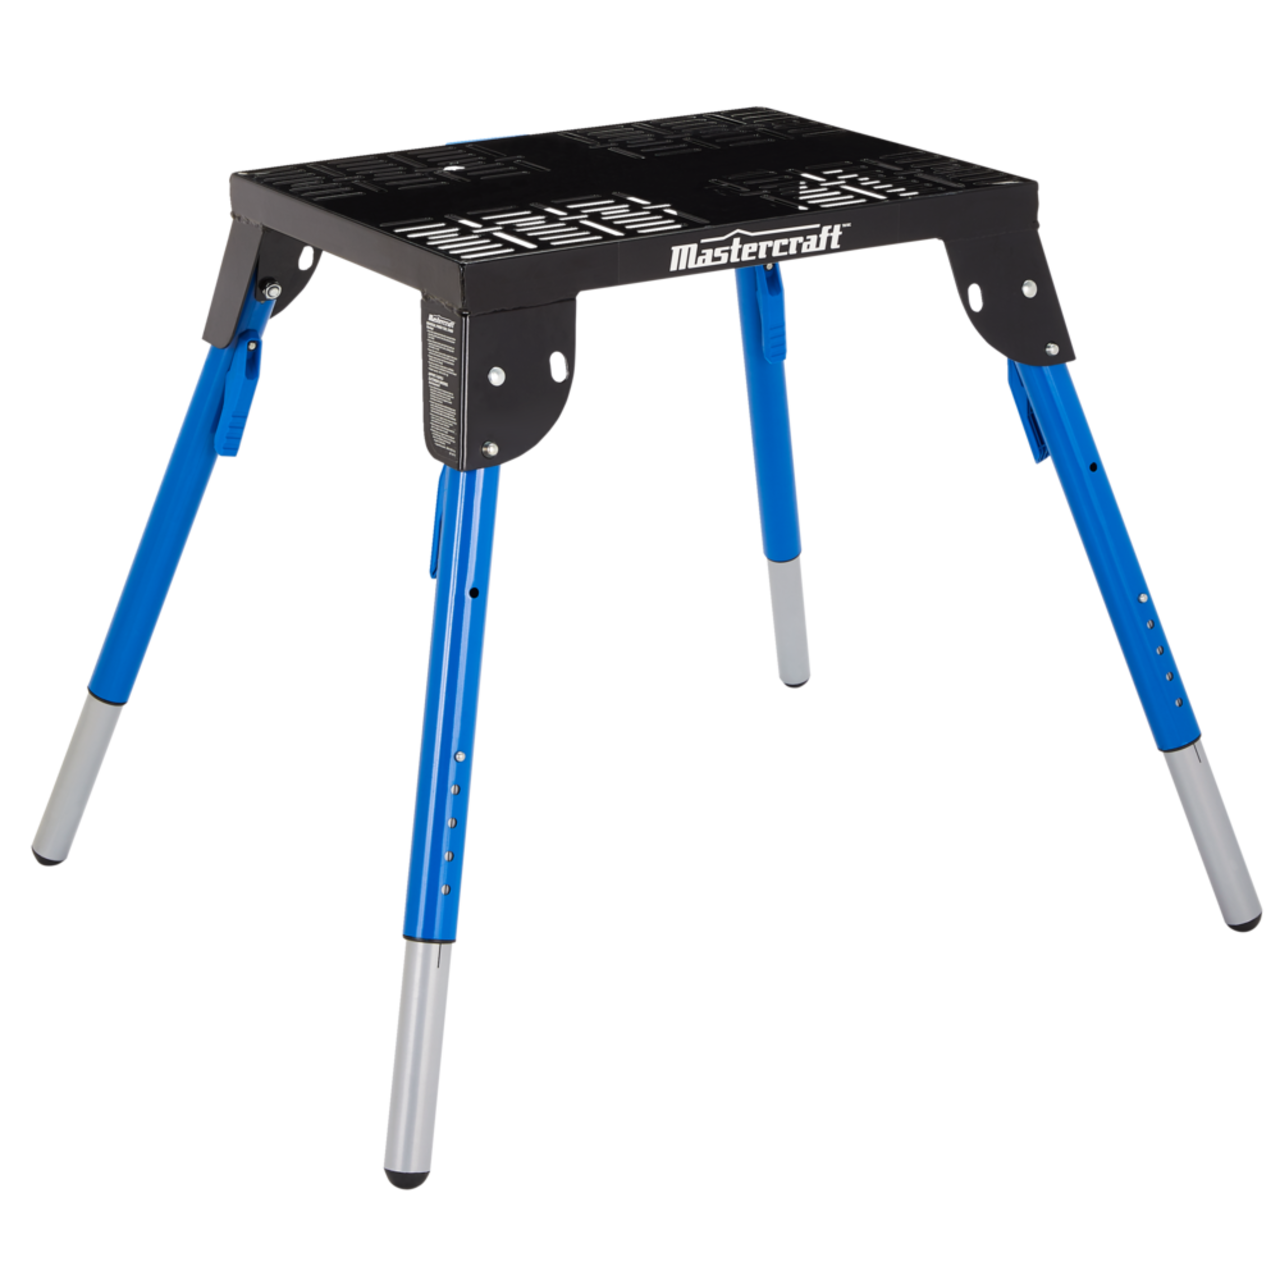 https://media-www.canadiantire.ca/product/fixing/tools/stationary-tools/0571637/mastercraft-universal-stand-6e847834-4755-40a1-9baf-1b0c48565491.png?imdensity=1&imwidth=640&impolicy=mZoom